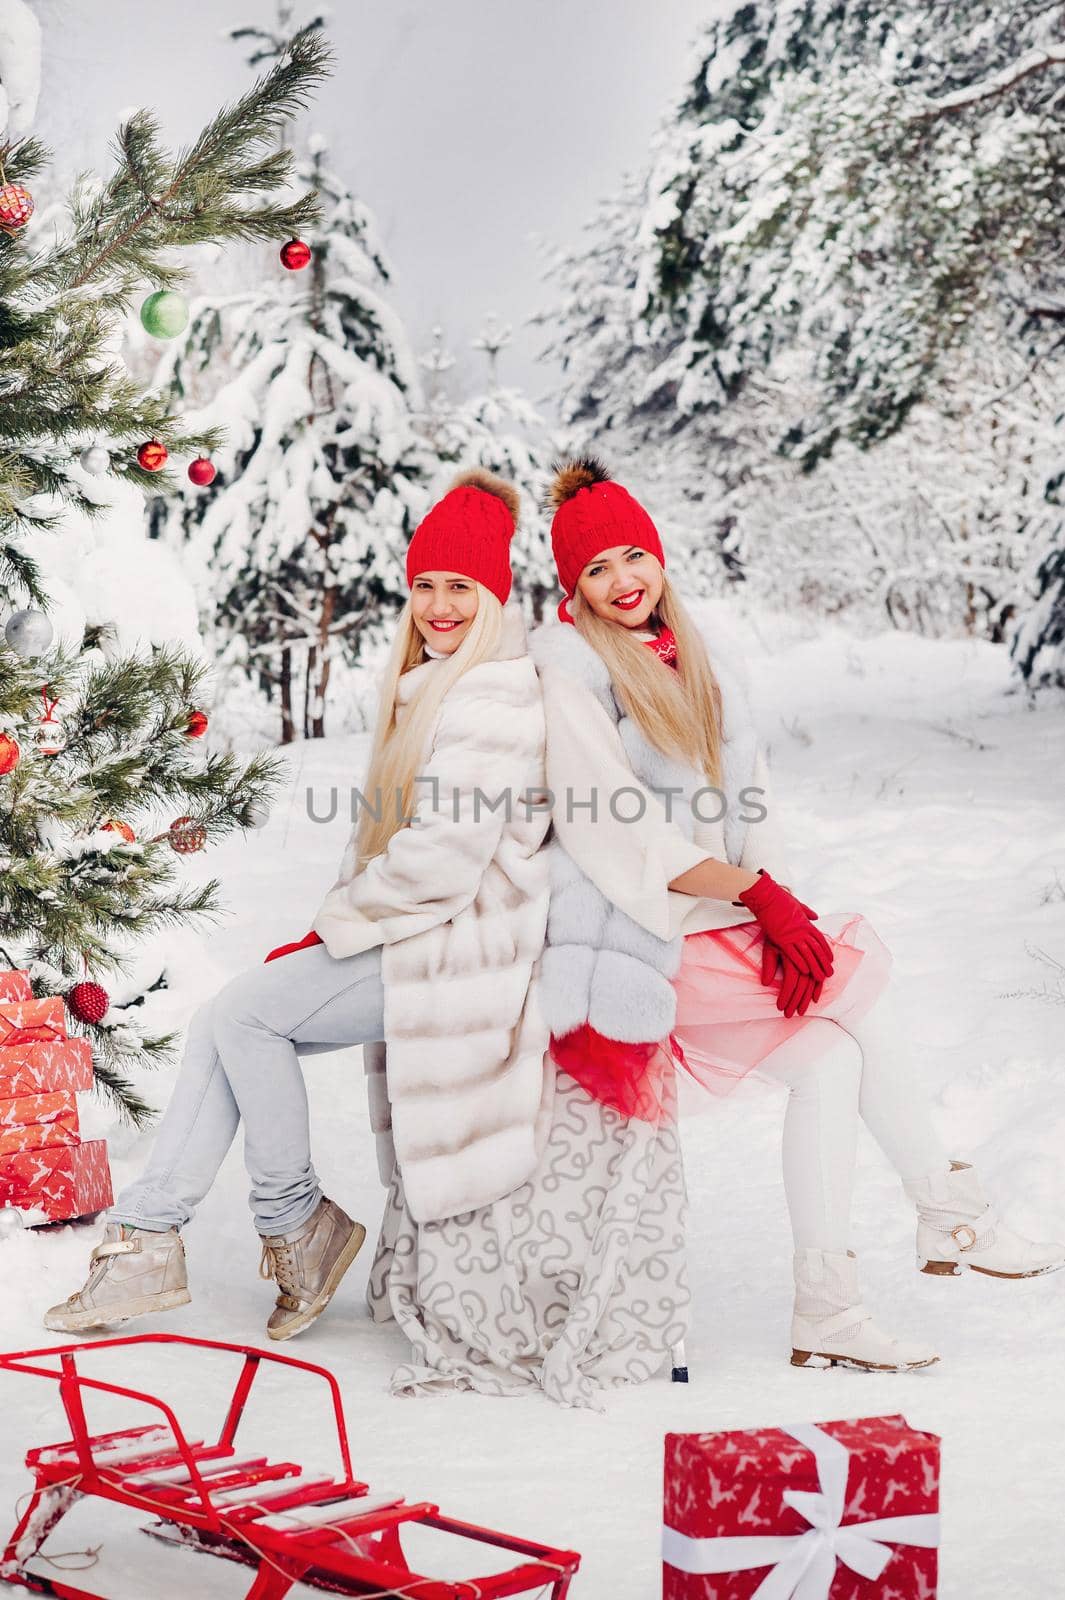 Two girls in the winter forest near a decorated Christmas tree.Girls on a Christmas tree in a snowy forest by Lobachad